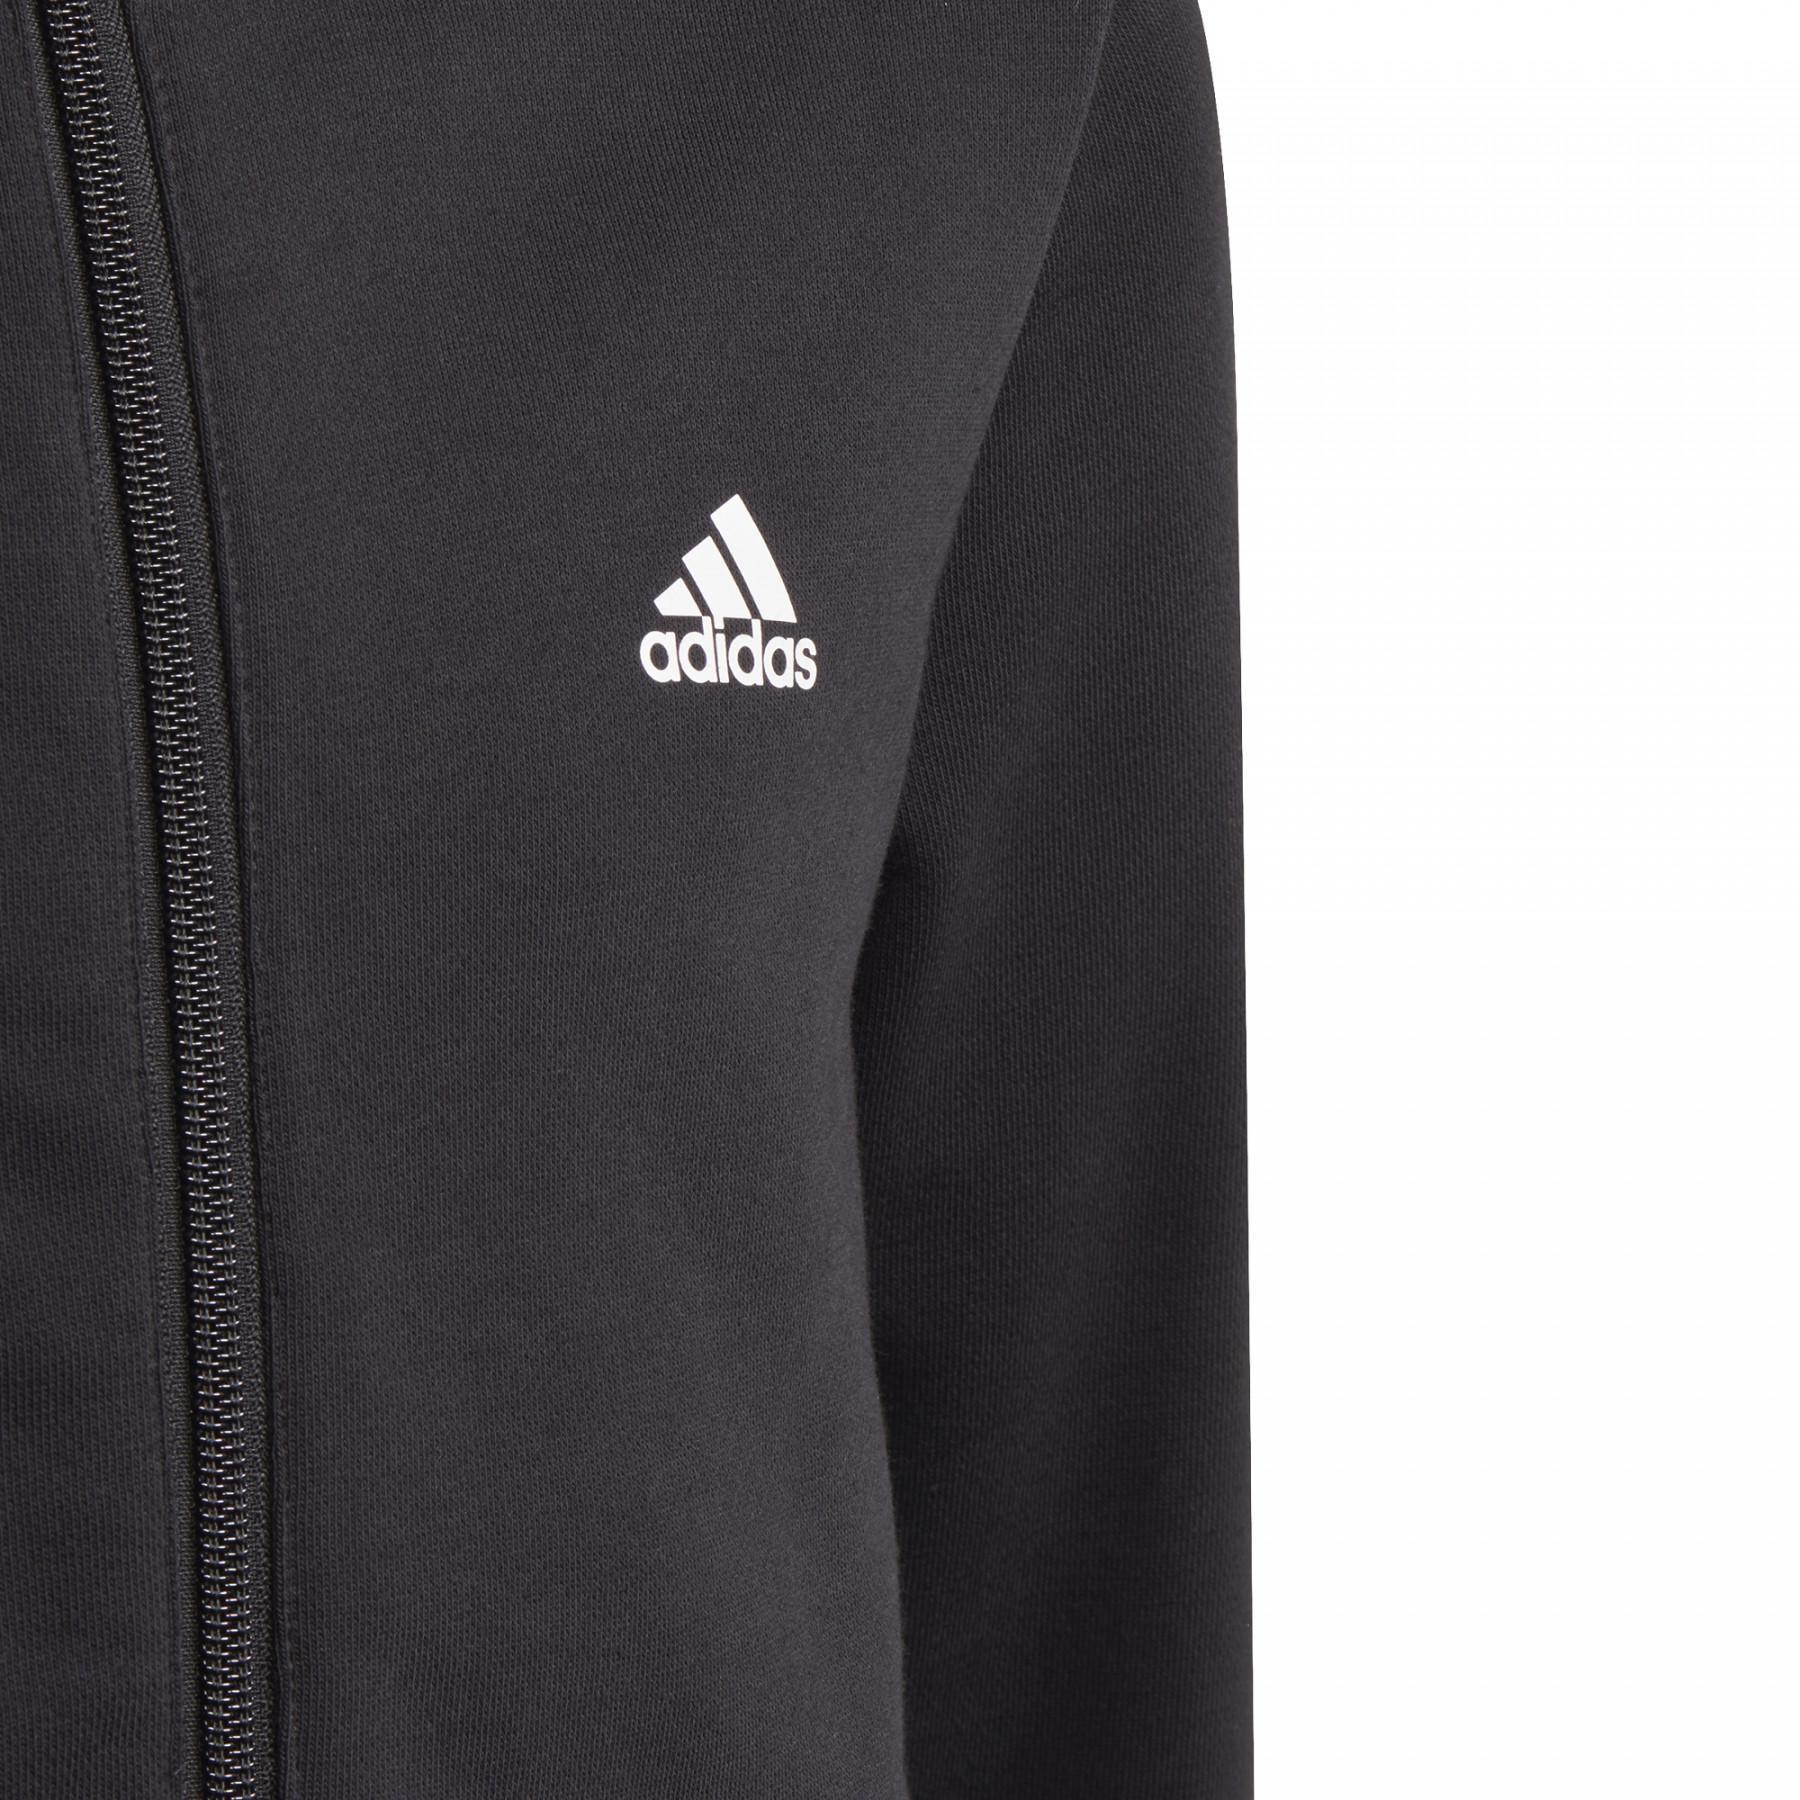 Children's jacket adidas s Allover Print Hooded Track